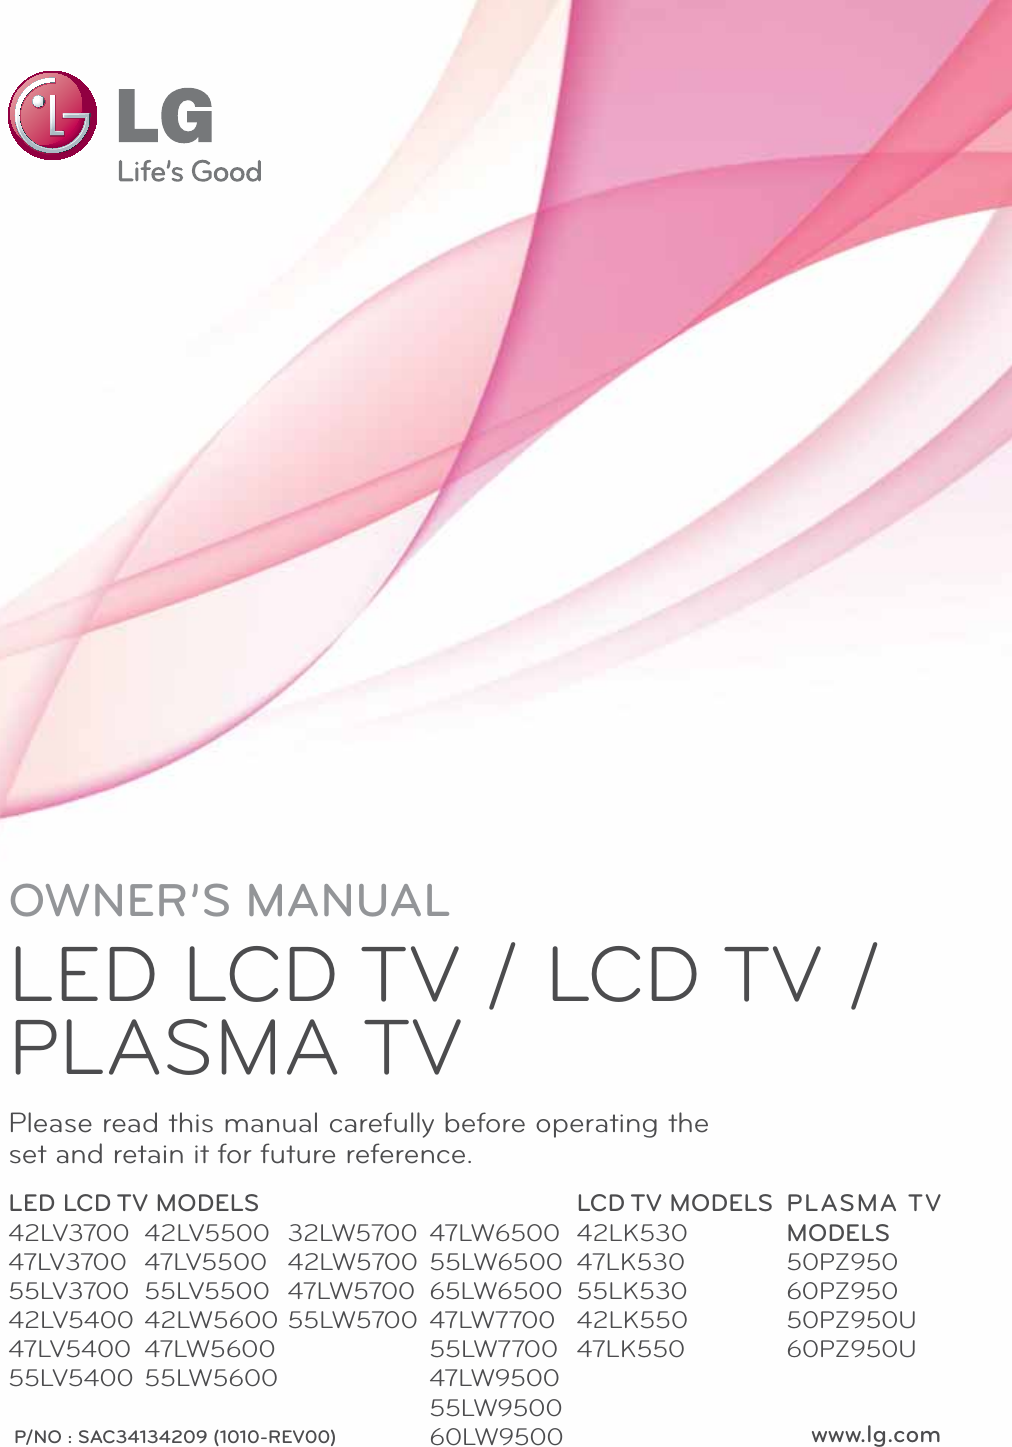 www.lg.comP/NO : SAC34134209 (1010-REV00)OWNER’S MANUALLED LCD TV / LCD TV / PLASMA TVPlease read this manual carefully before operating the set and retain it for future reference.LED LCD TV MODELS42LV370047LV370055LV370042LV540047LV540055LV5400LCD TV MODELS42LK53047LK53055LK53042LK55047LK550PLASMA TV MODELS50PZ95060PZ95050PZ950U60PZ950U42LV550047LV550055LV550042LW560047LW560055LW560032LW570042LW570047LW570055LW570047LW650055LW650065LW650047LW770055LW770047LW950055LW950060LW9500